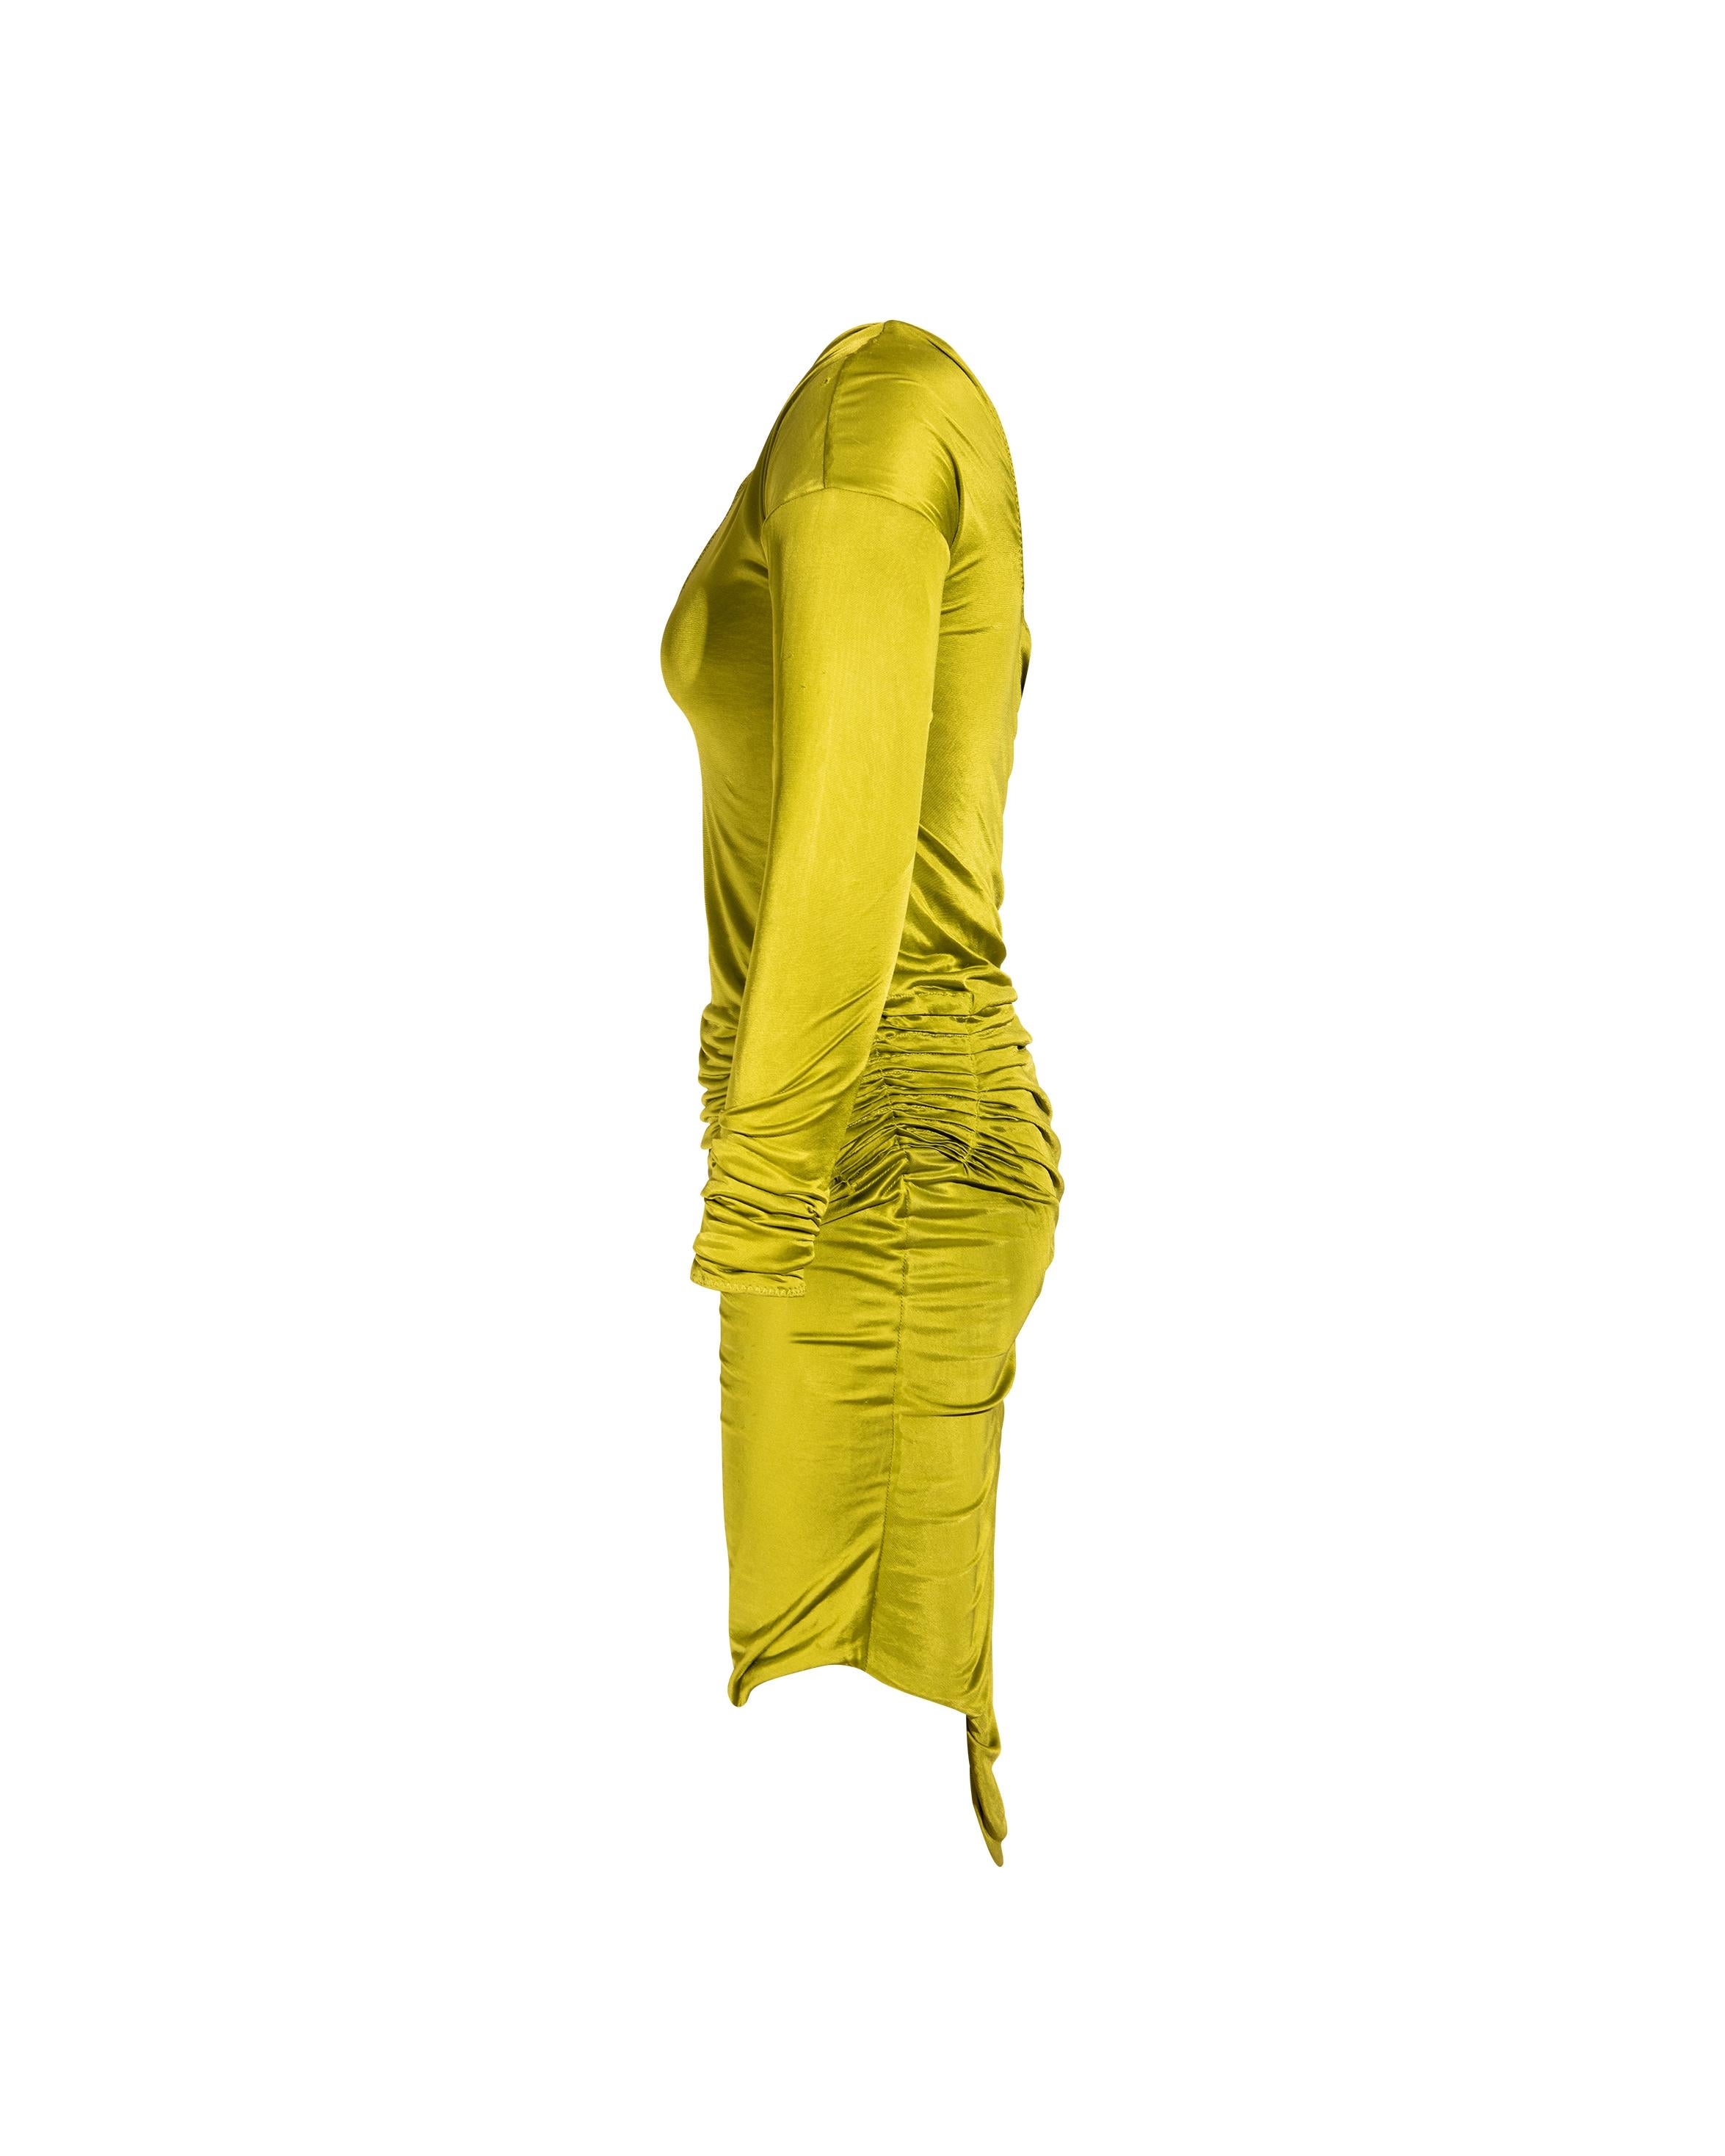 c. 2003 Gucci by Tom Ford asymmetrical chartreuse long sleeve dress. Chartreuse v-neck bodycon dress with asymmetrical strap across chest, ruching at side and asymmetrical hem.